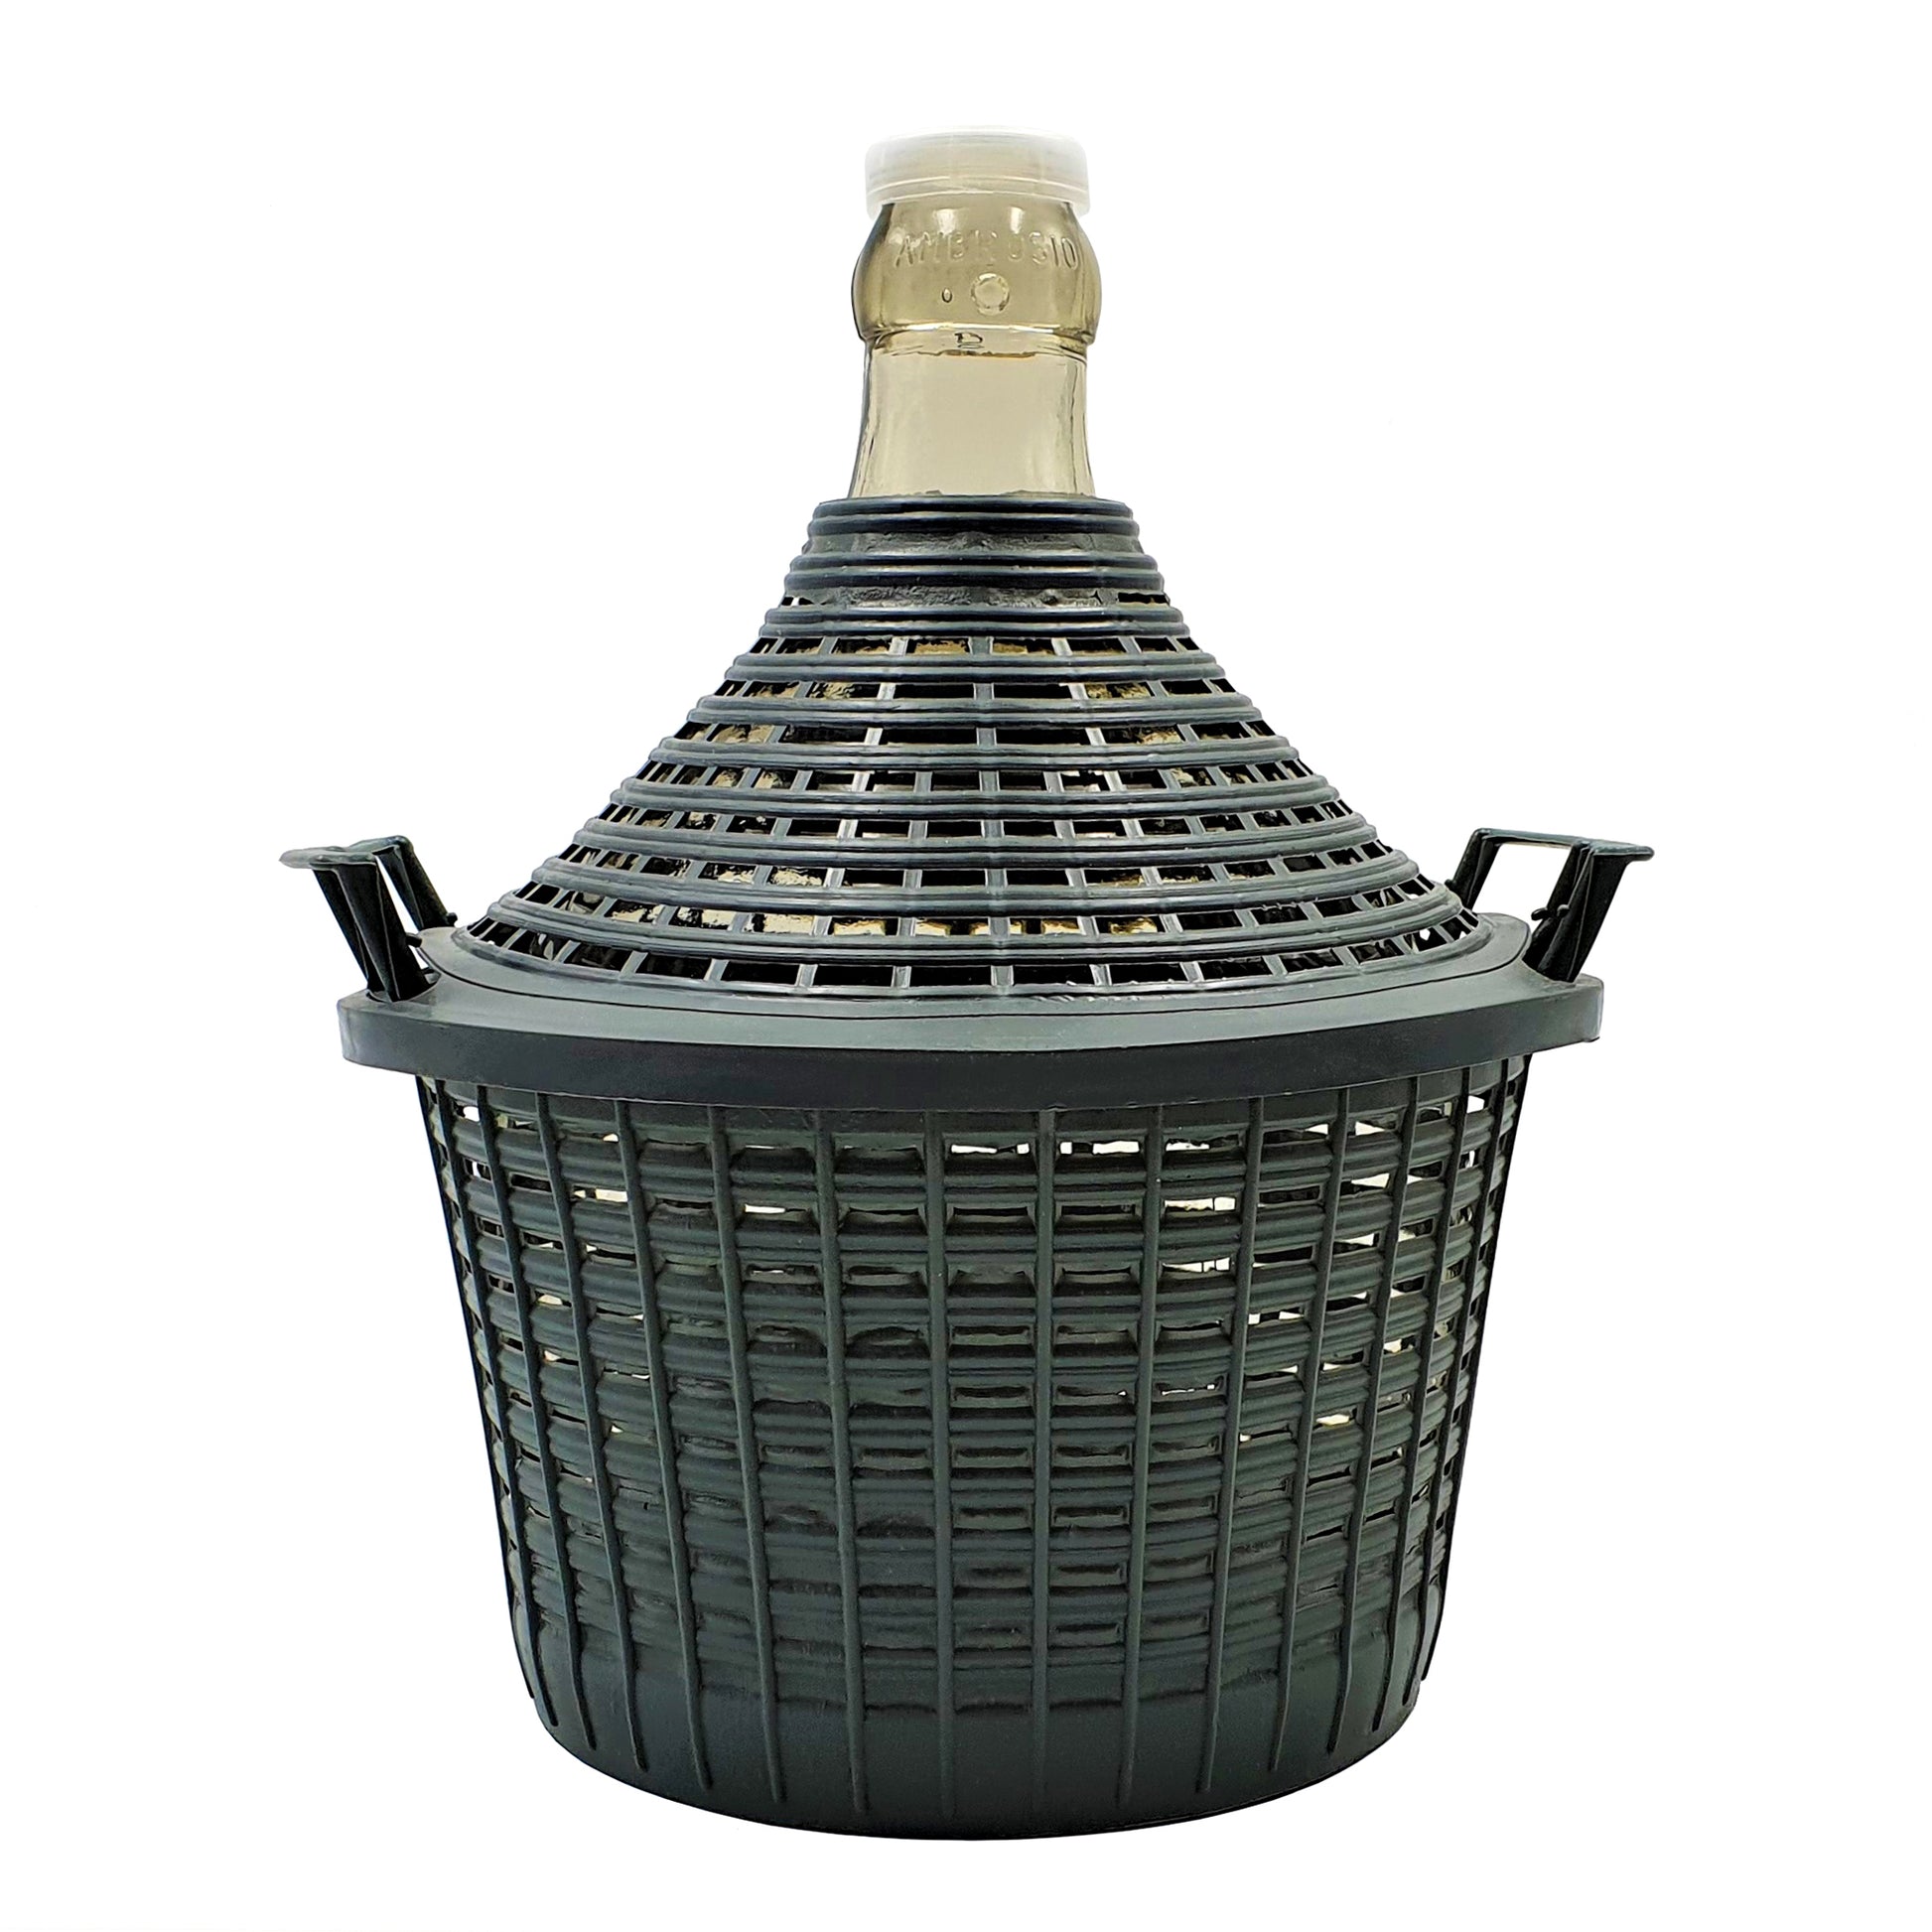 Italian made glass narrow neck demijohn with removable PVC basket. Used for fermenting and storing wine, cider, beer, oil, and food ferments. 